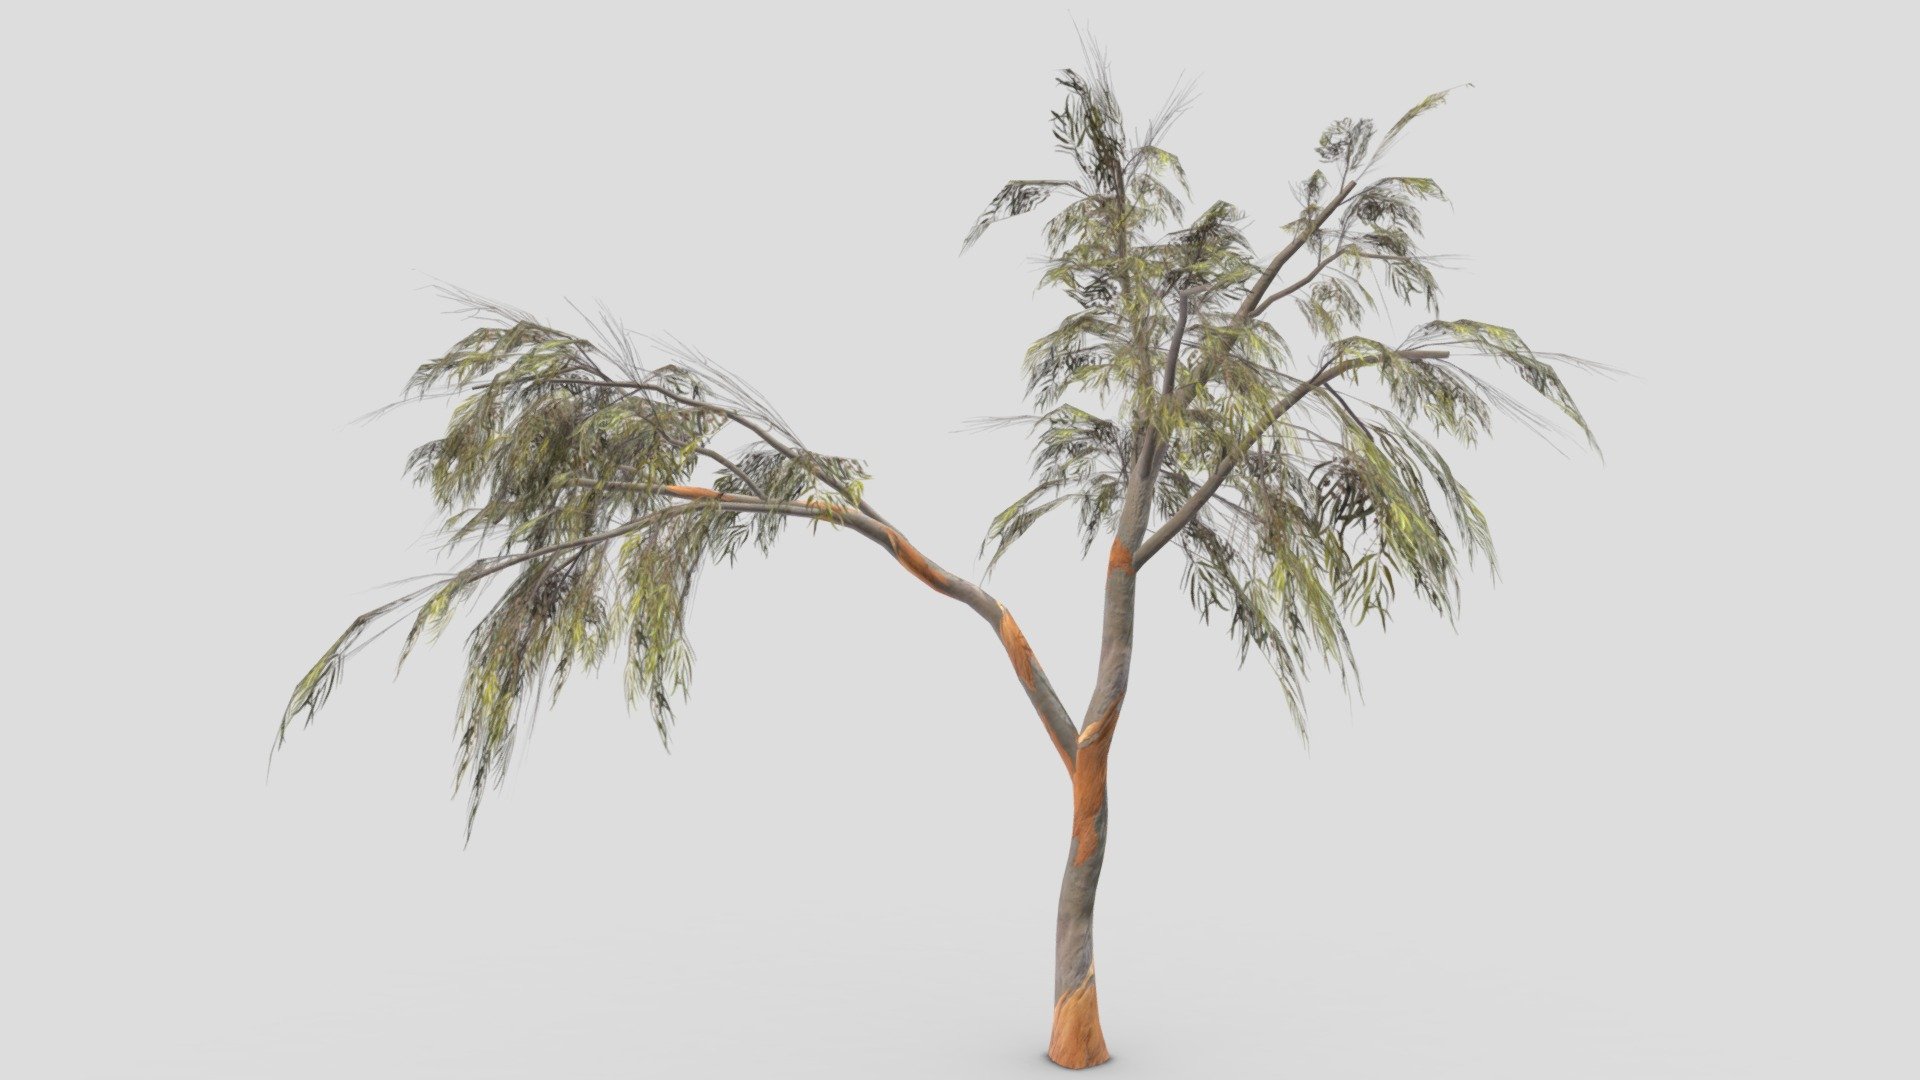 This is a low poly model of the Eucalyptus Aus Tree. I made this file for game developers and I try to provide lowpoly model 3d model